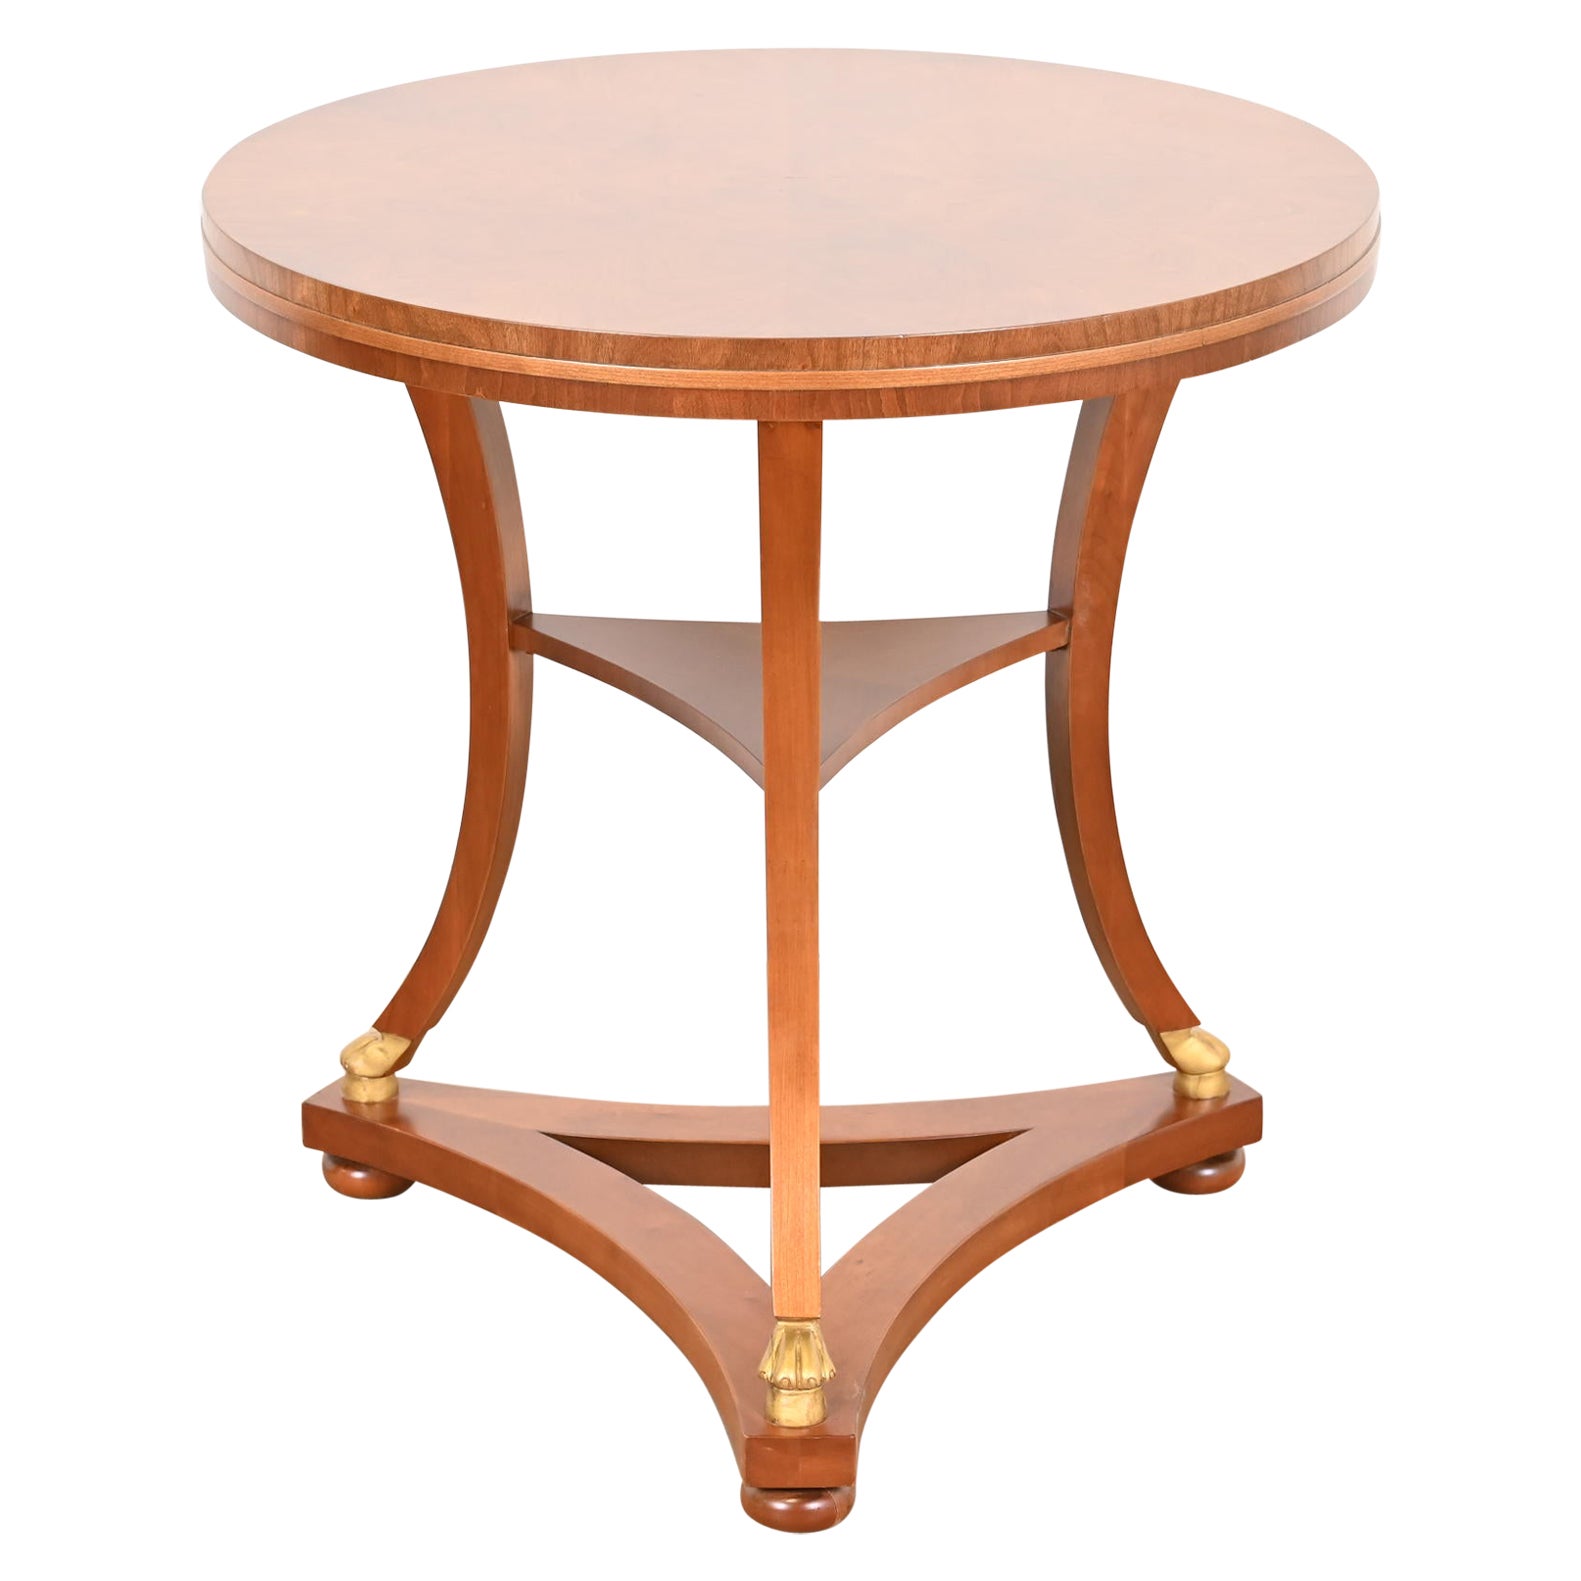 Baker Furniture French Empire Mahogany Tea Table, Newly Refinished